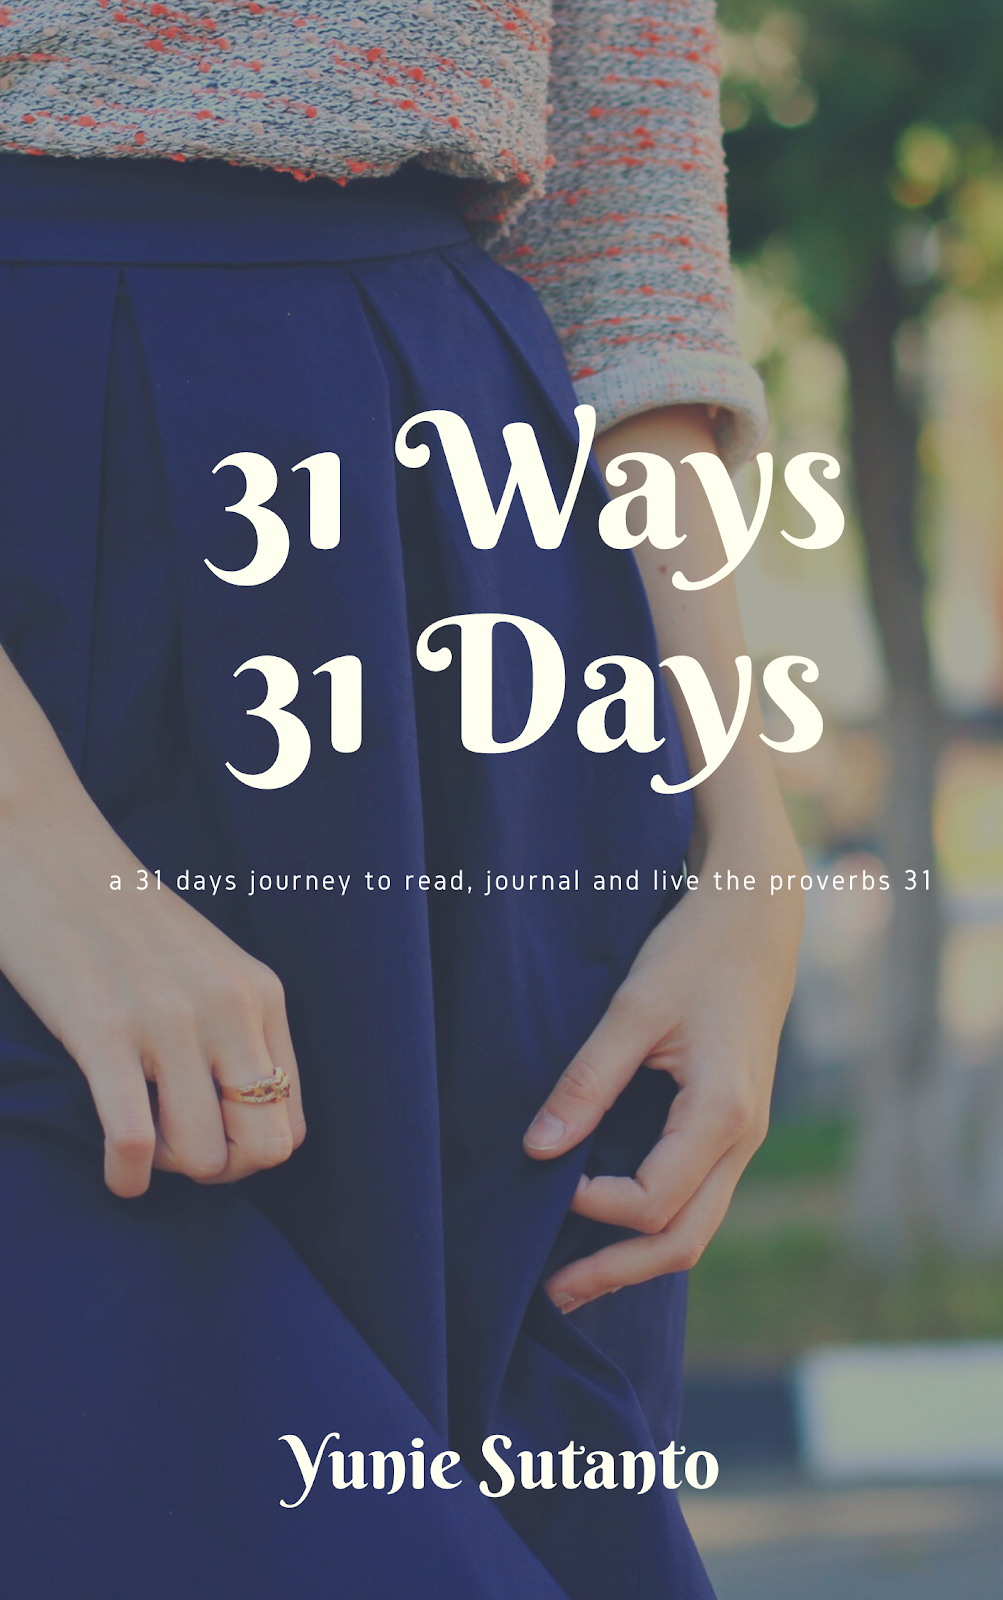 Join the 31 days 31 ways challenge!